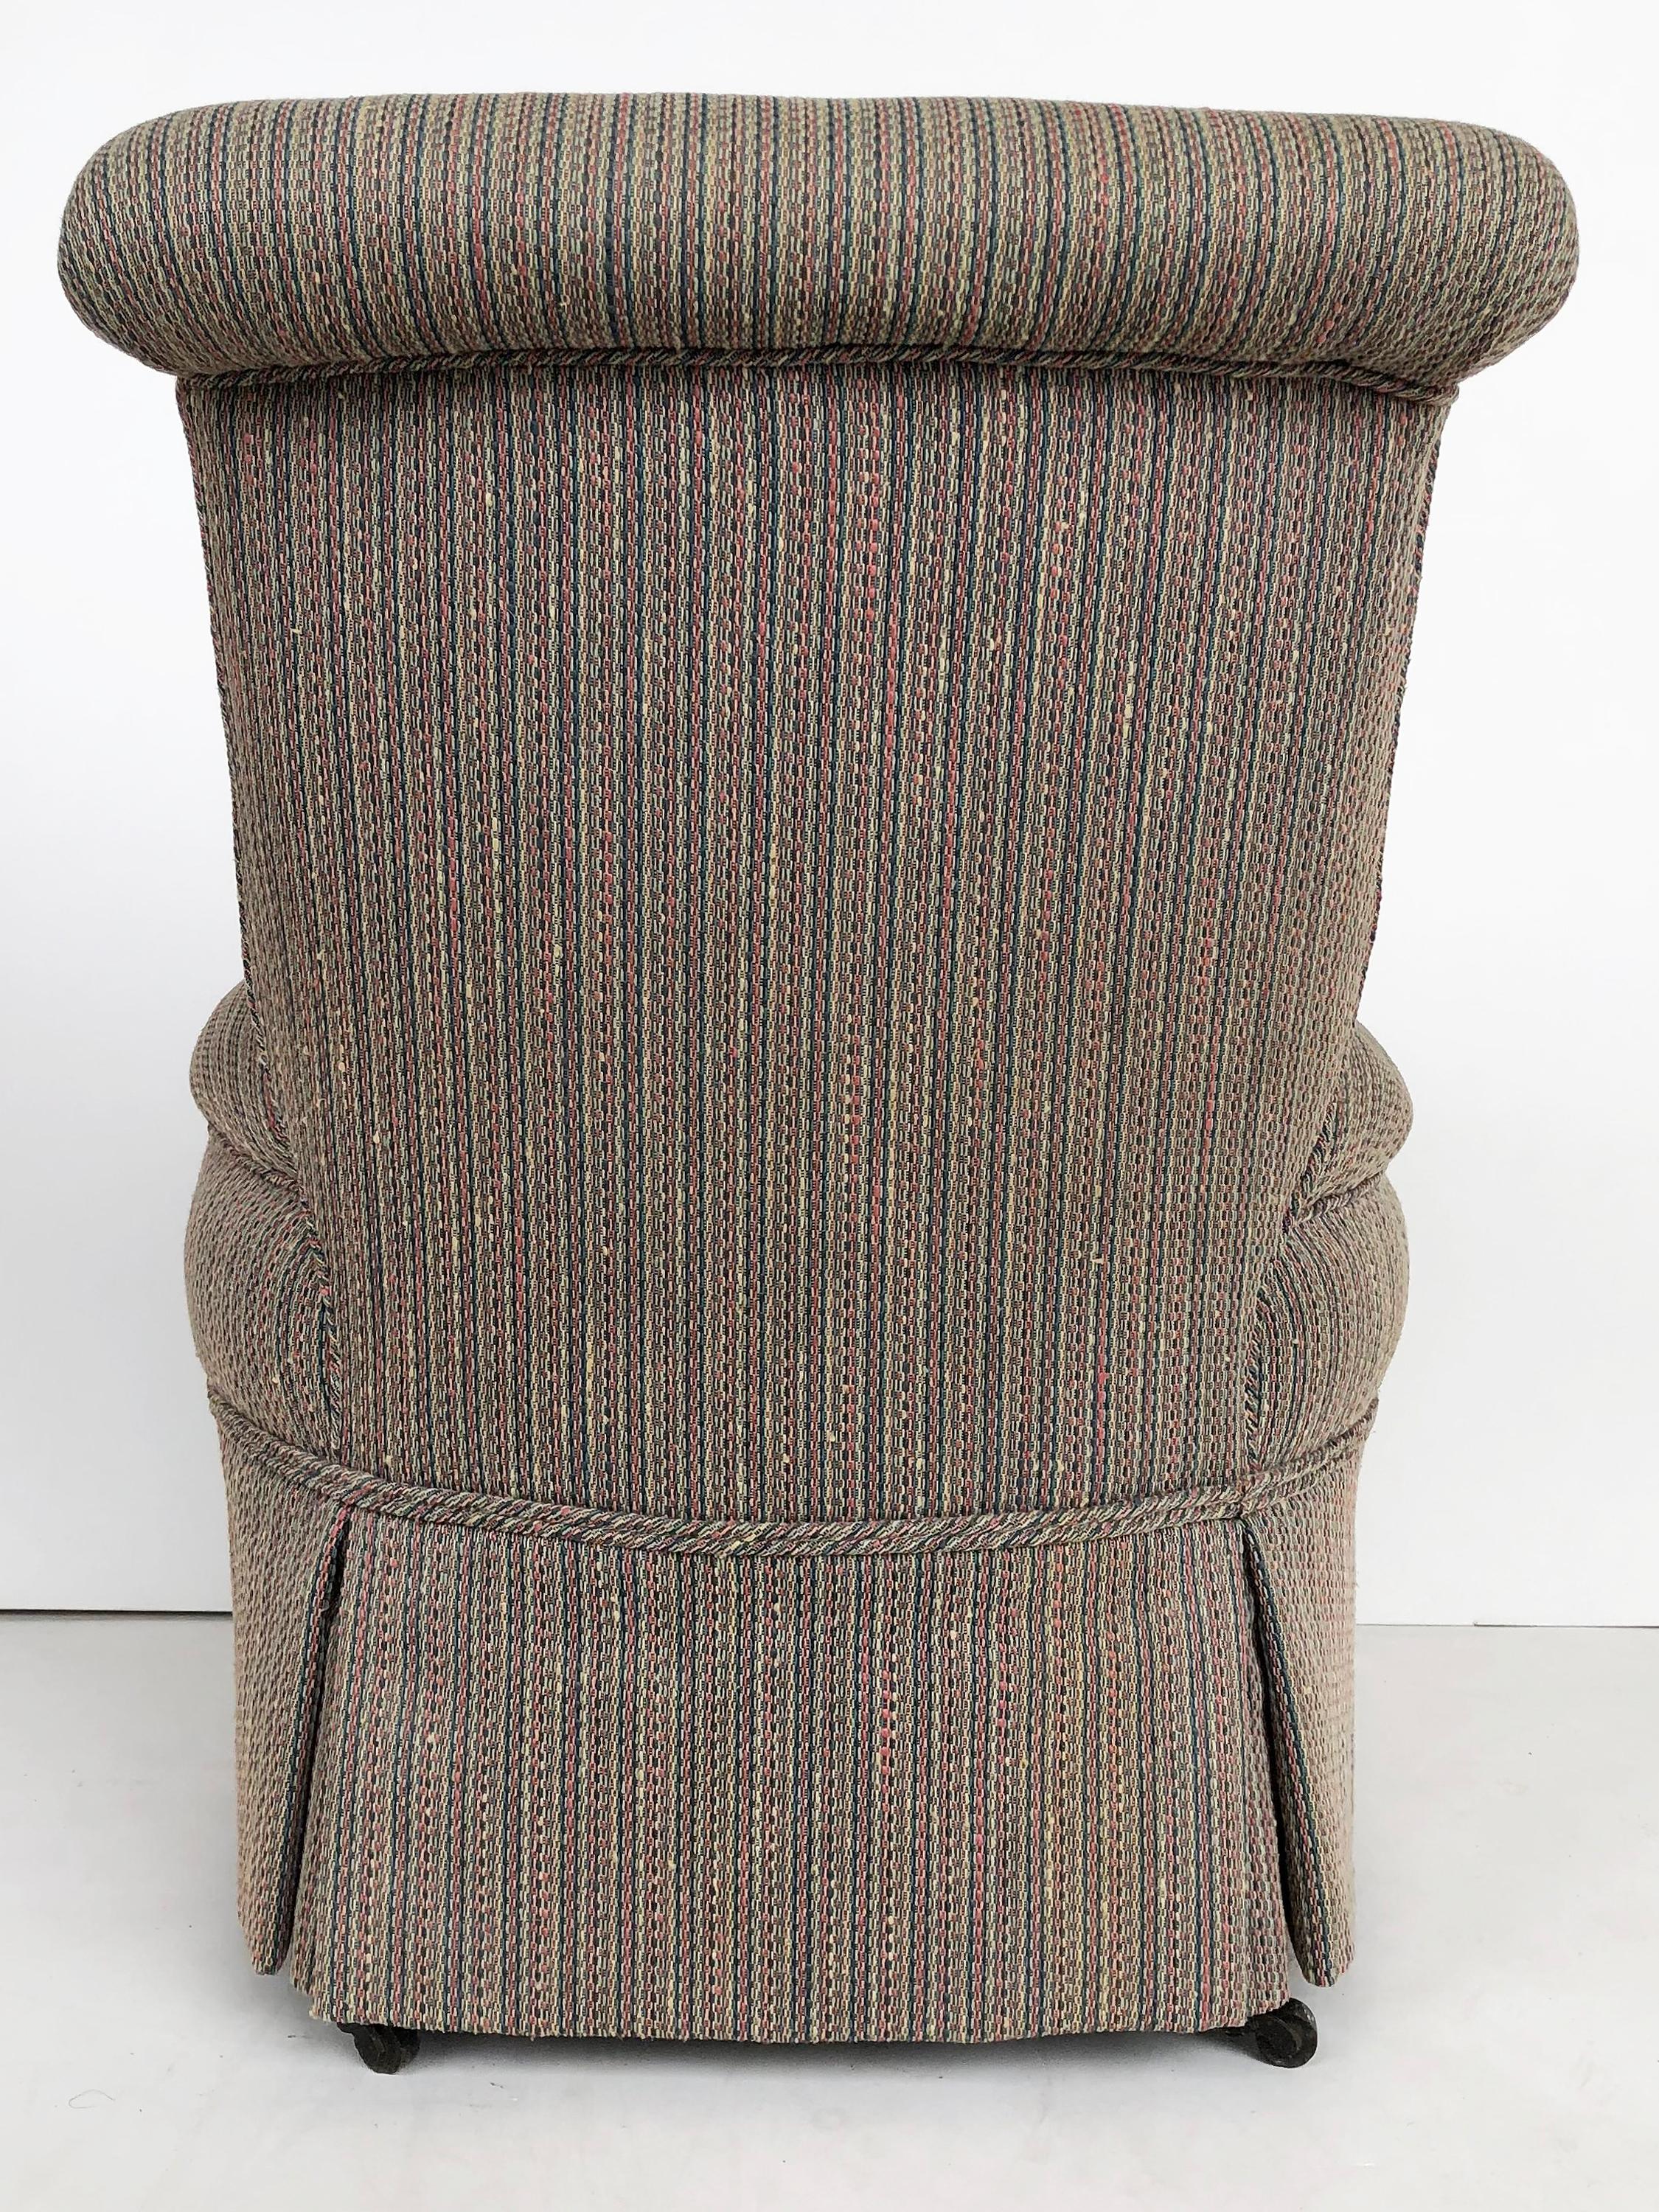 Antique Napoleon III Slipper Chair circa 1900, Turned Legs on Casters 1